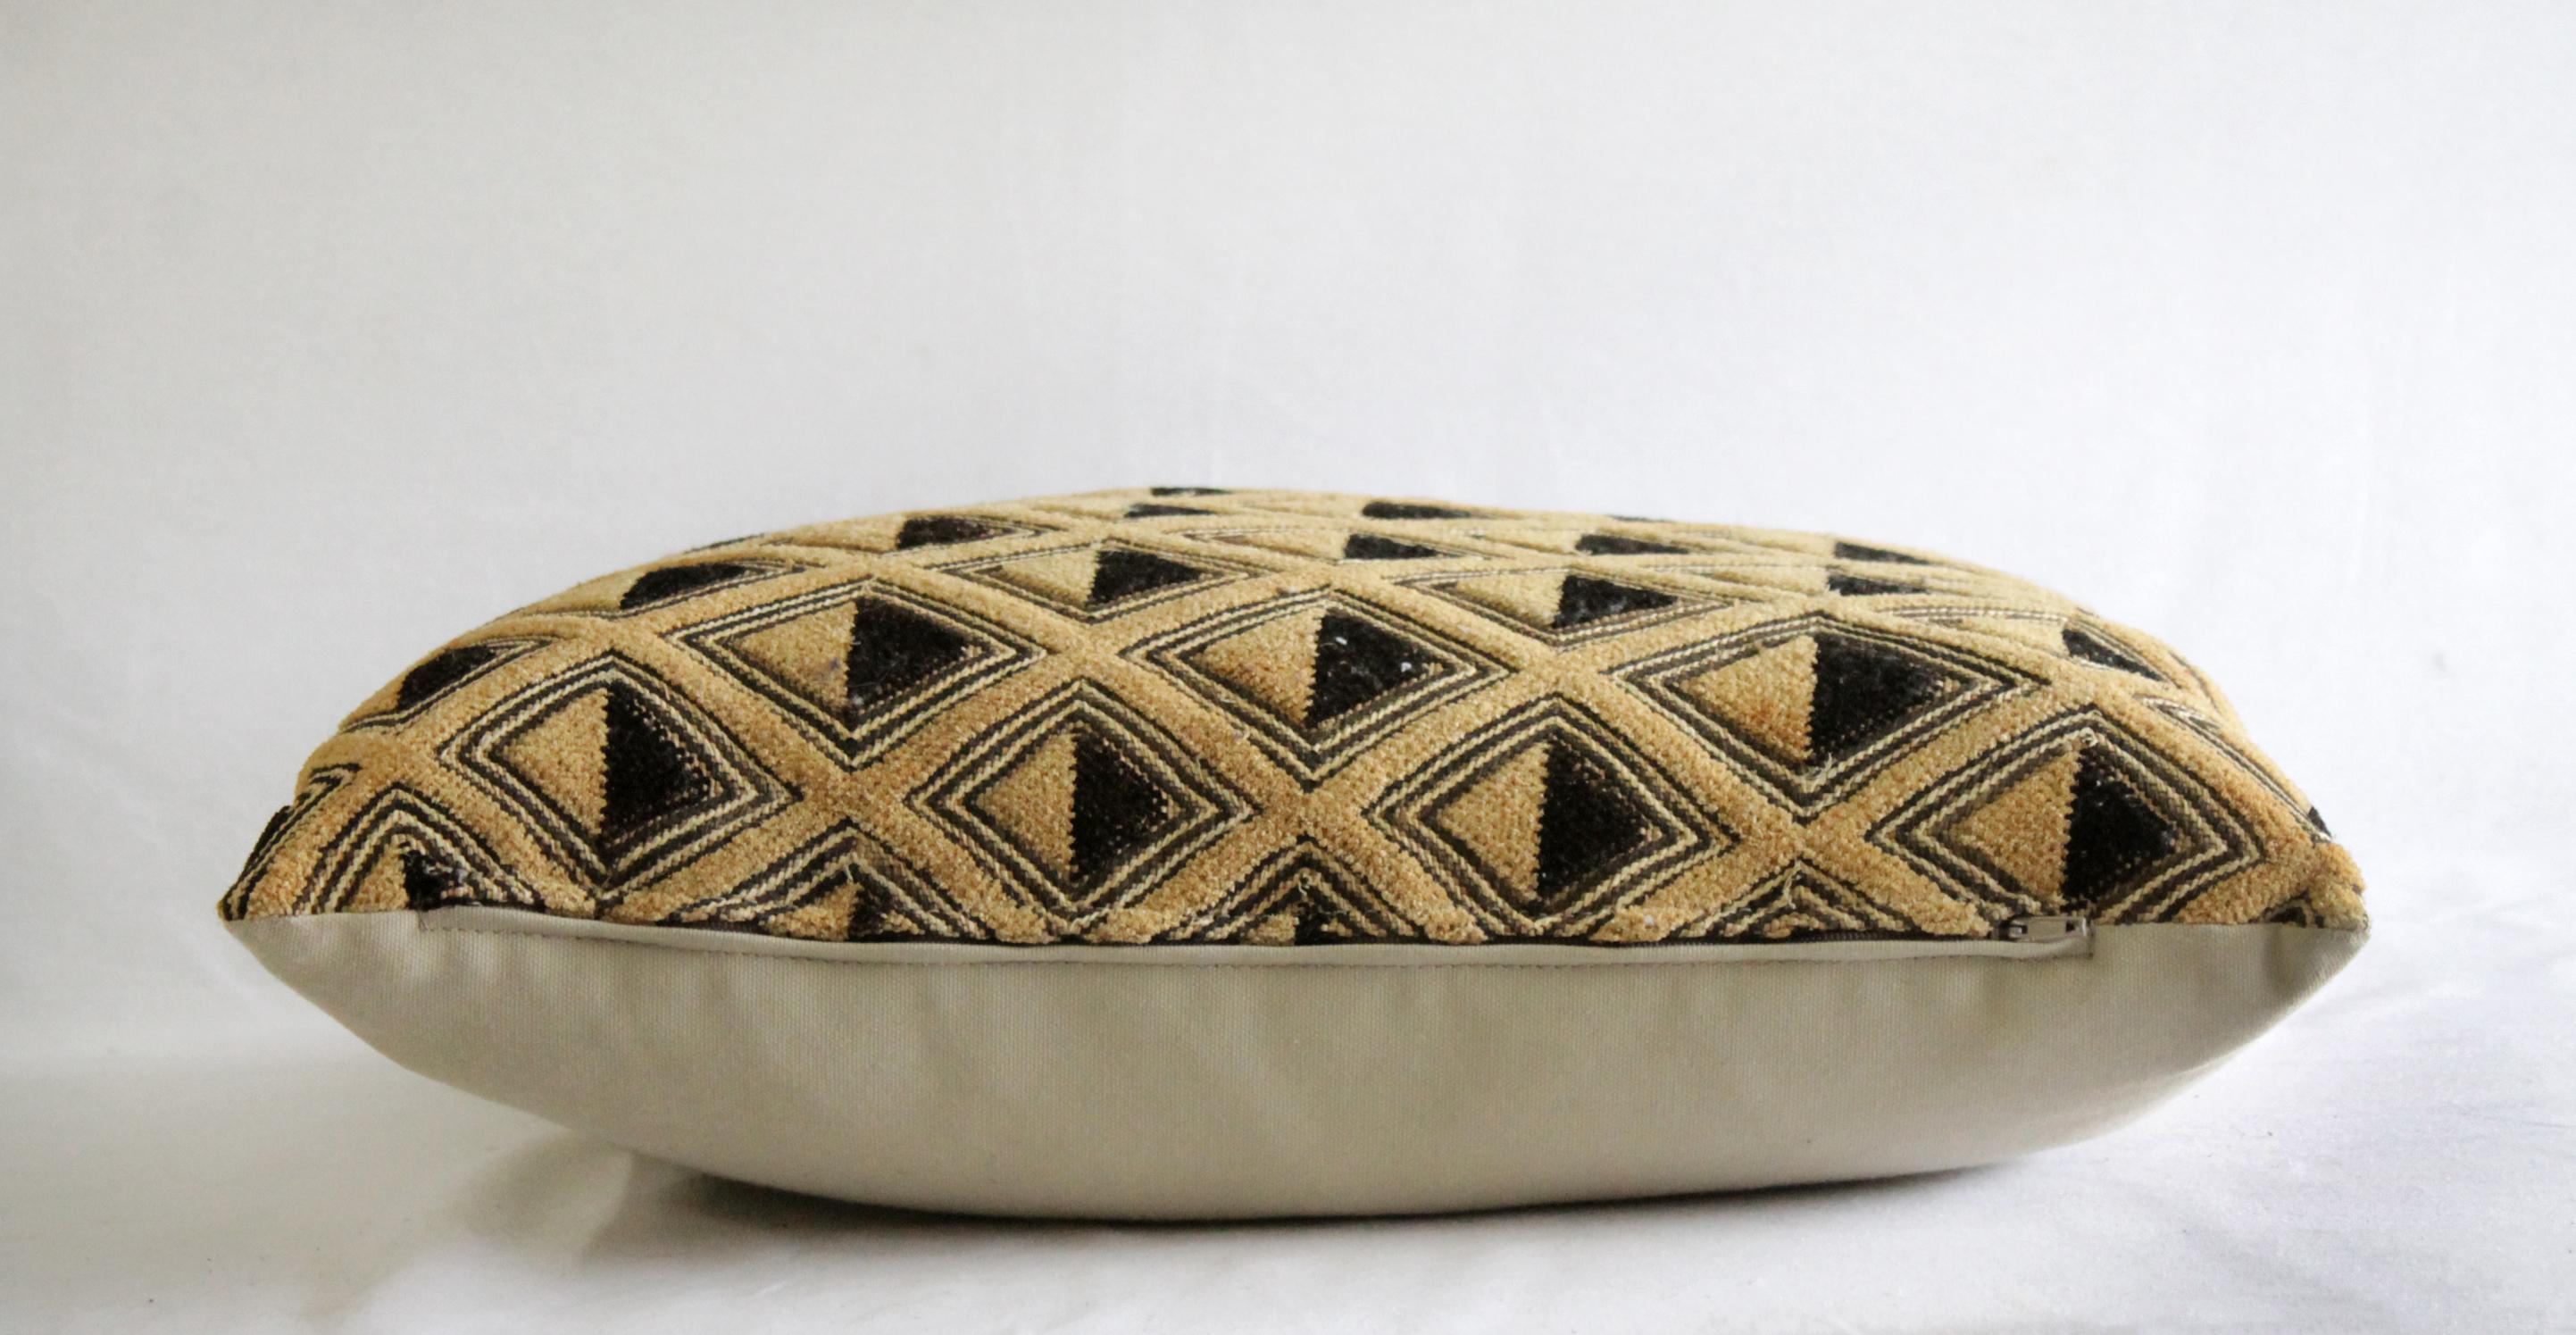 Vintage African Kuba Cloth pillow black and tan pattern, back side is natural cotton. 
Measures: 17